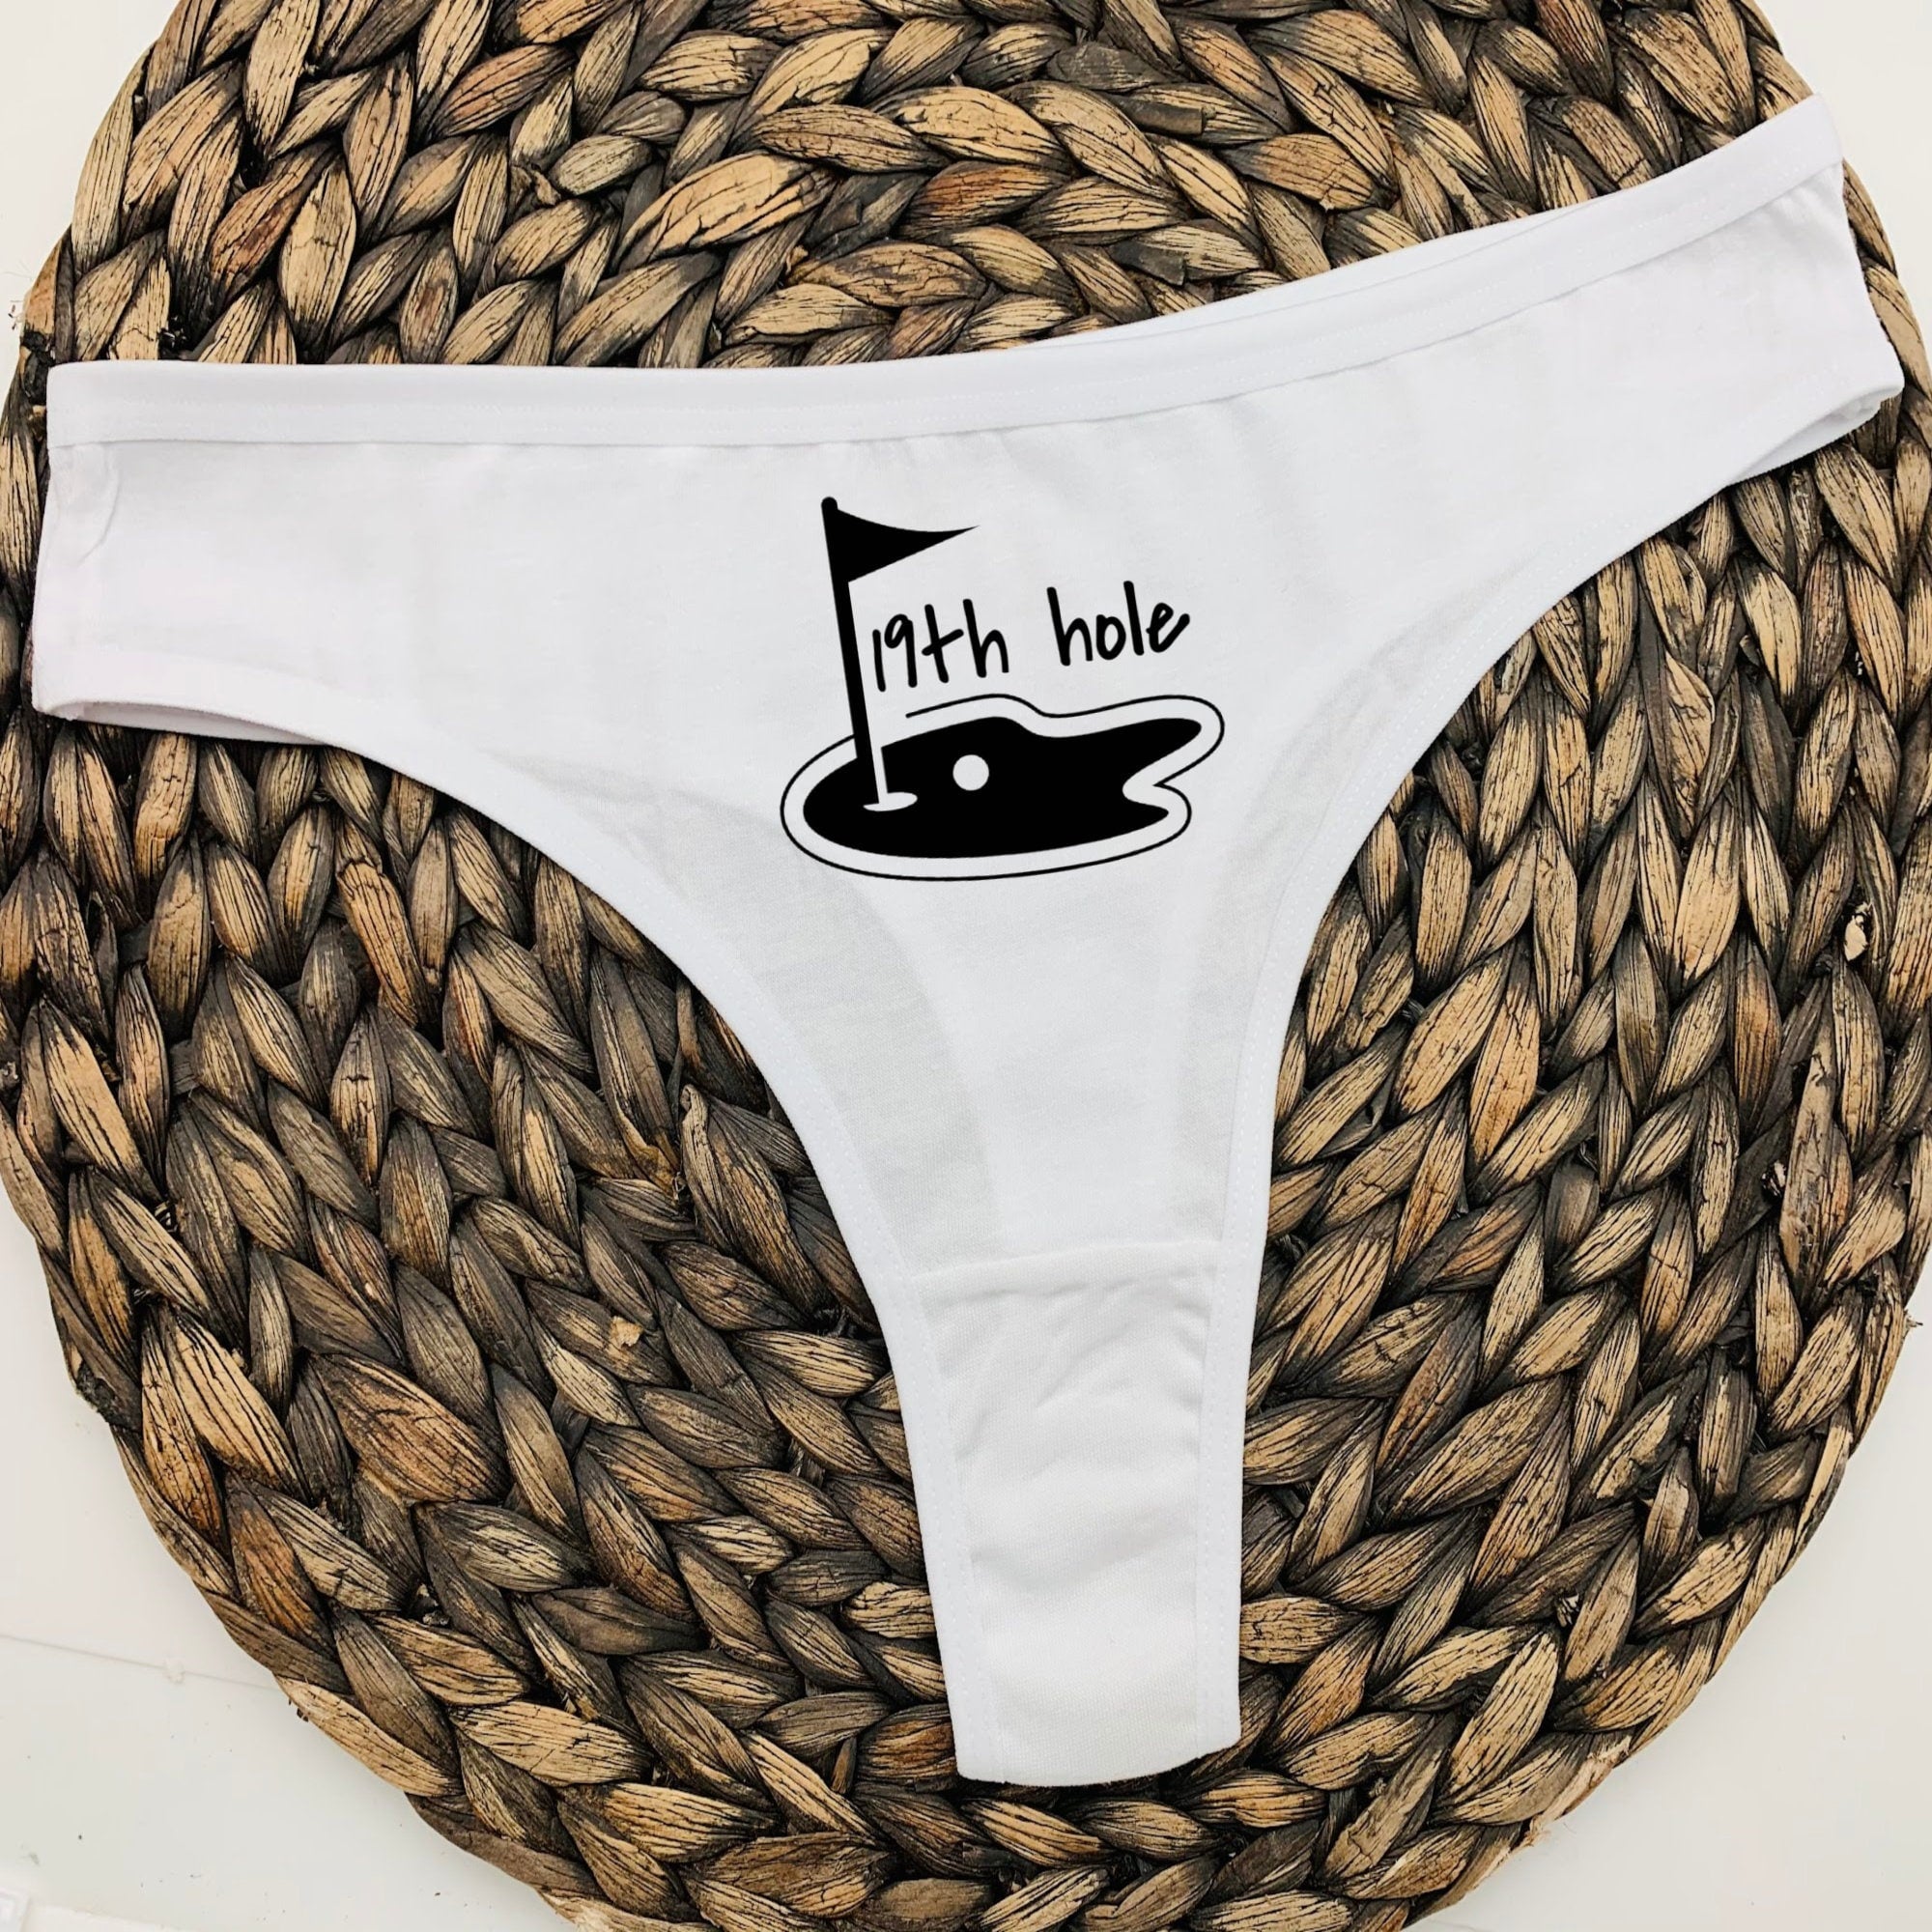 Funny Golf Thong for Men - Novelty Golf Underwear - 19th Hole Gag Gift